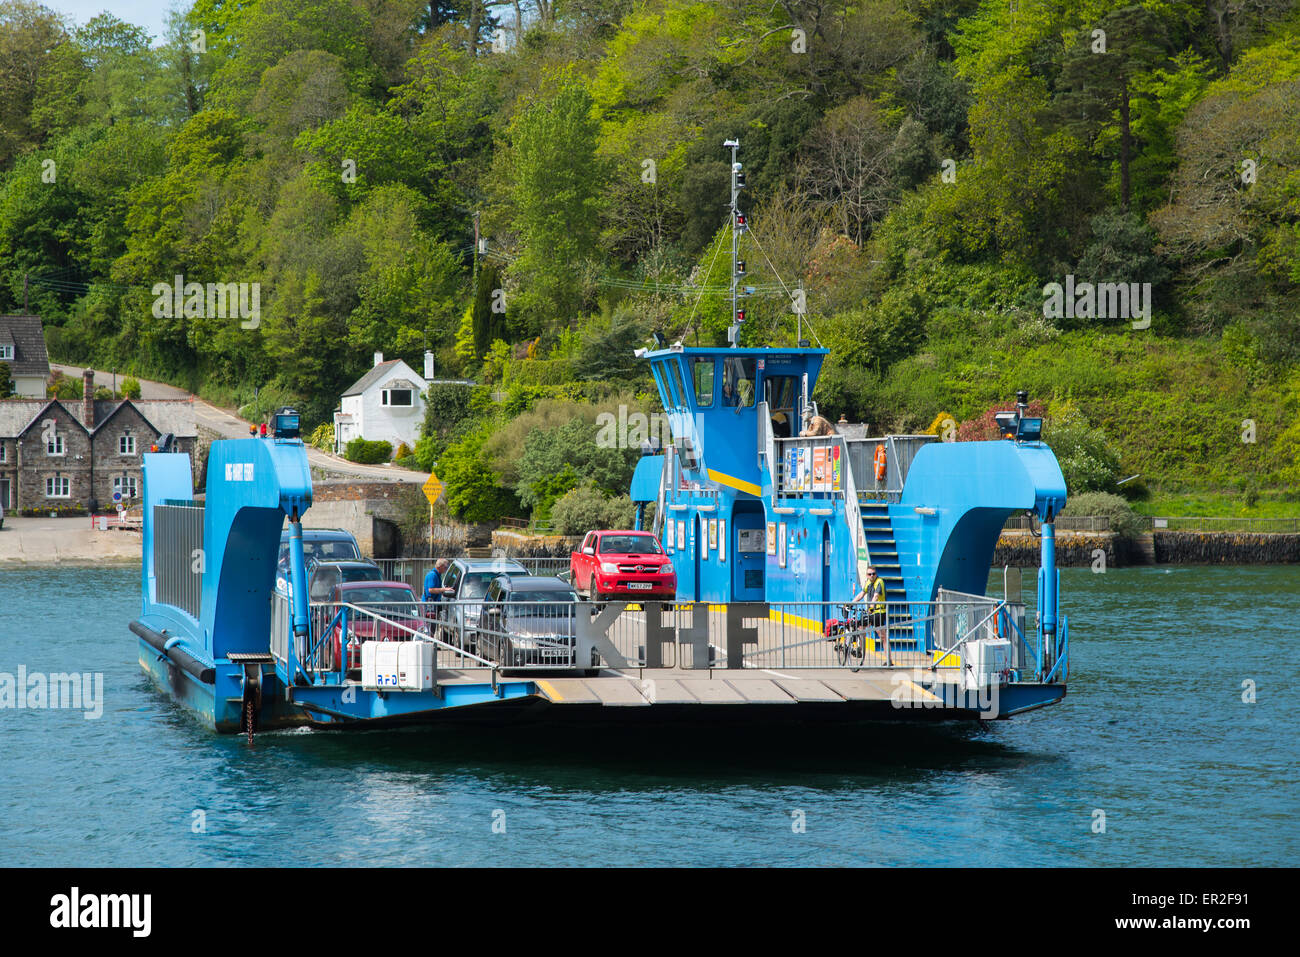 King Harry Ferry across the River Fal between Feock and Philleigh, Cornwall.  Seen approaching Philleigh. Stock Photo